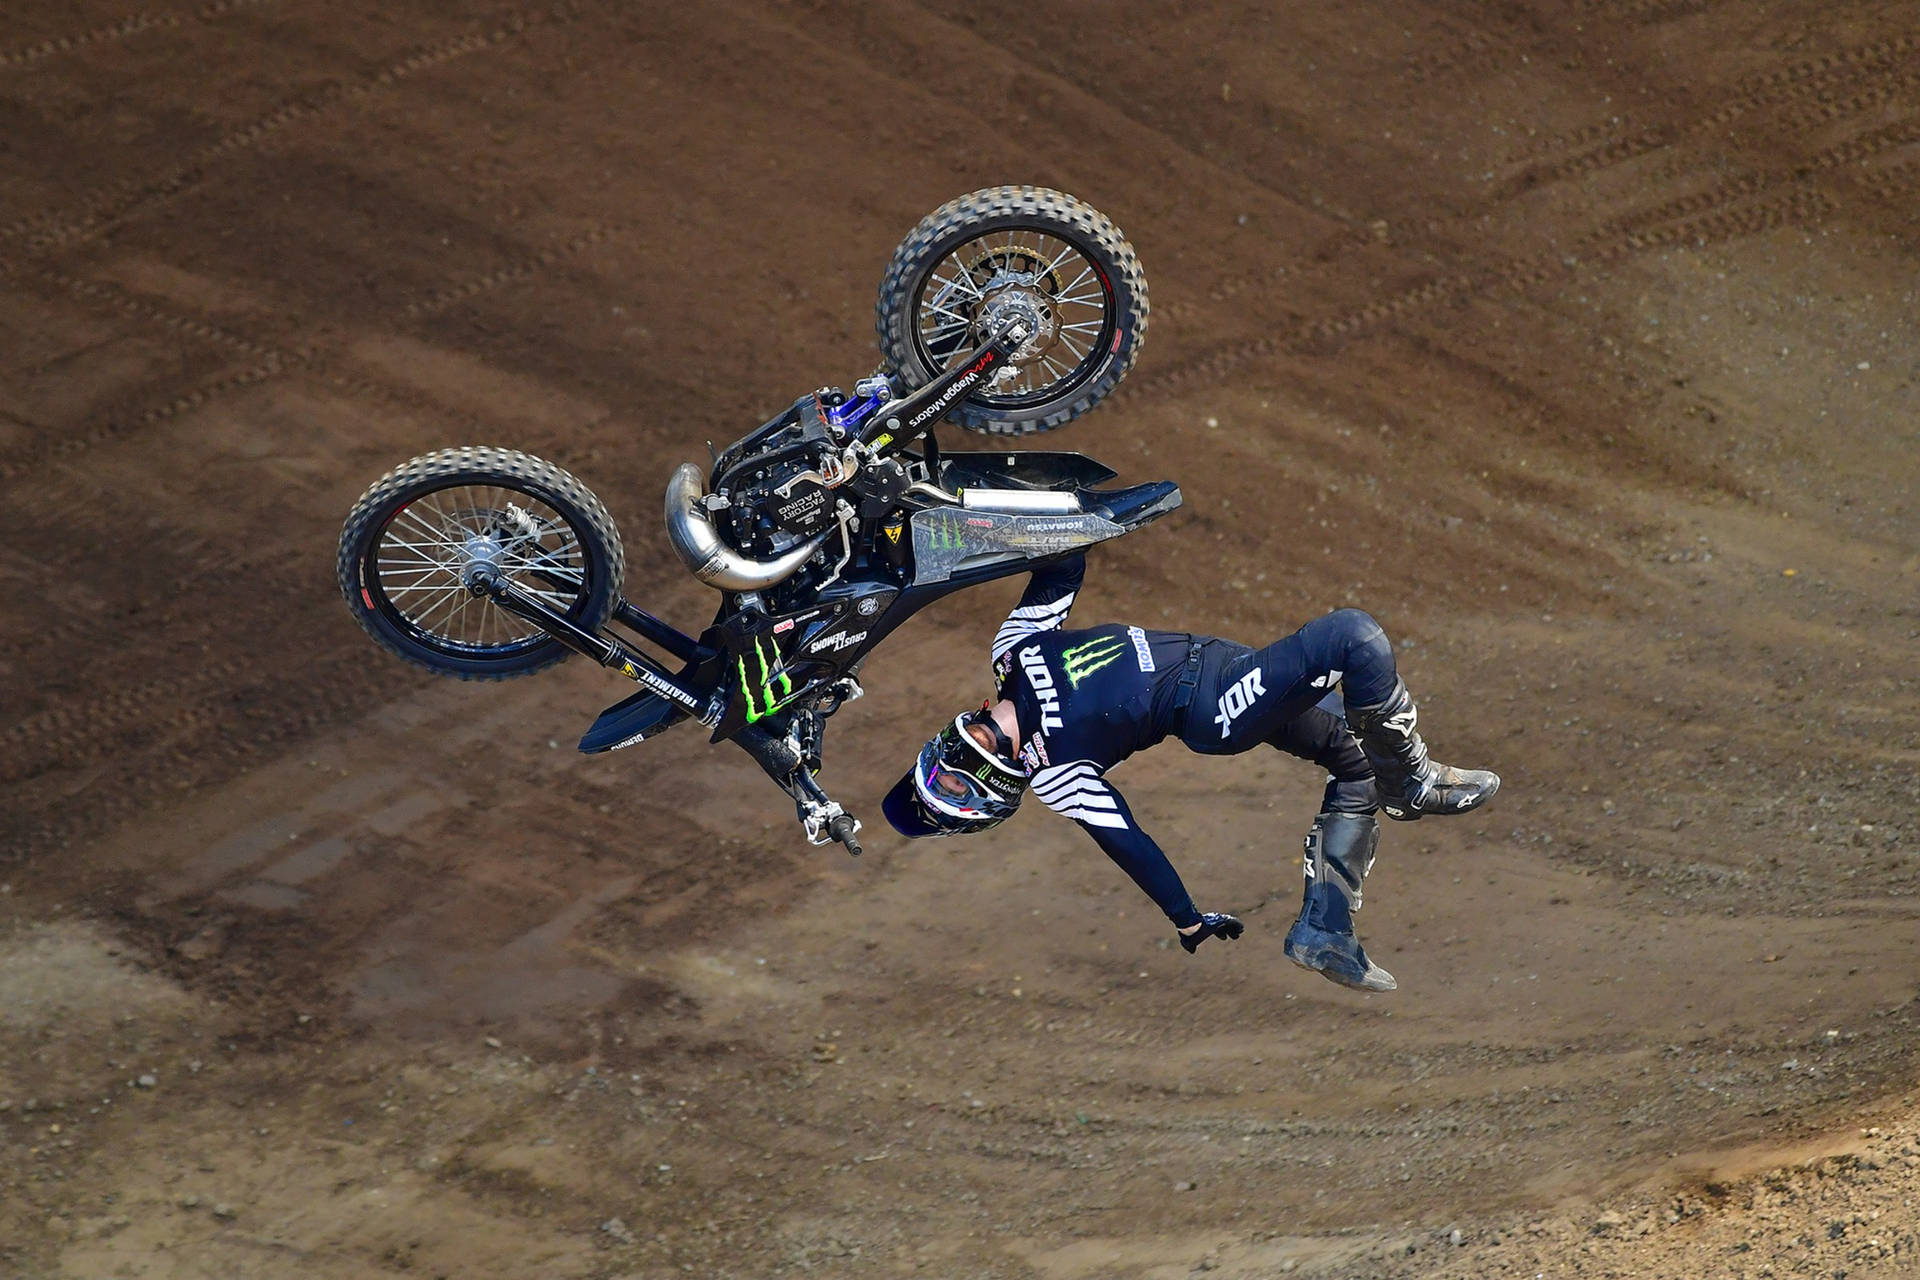 Caption: Thrill Of Backflip At X Games Motocross Event Background